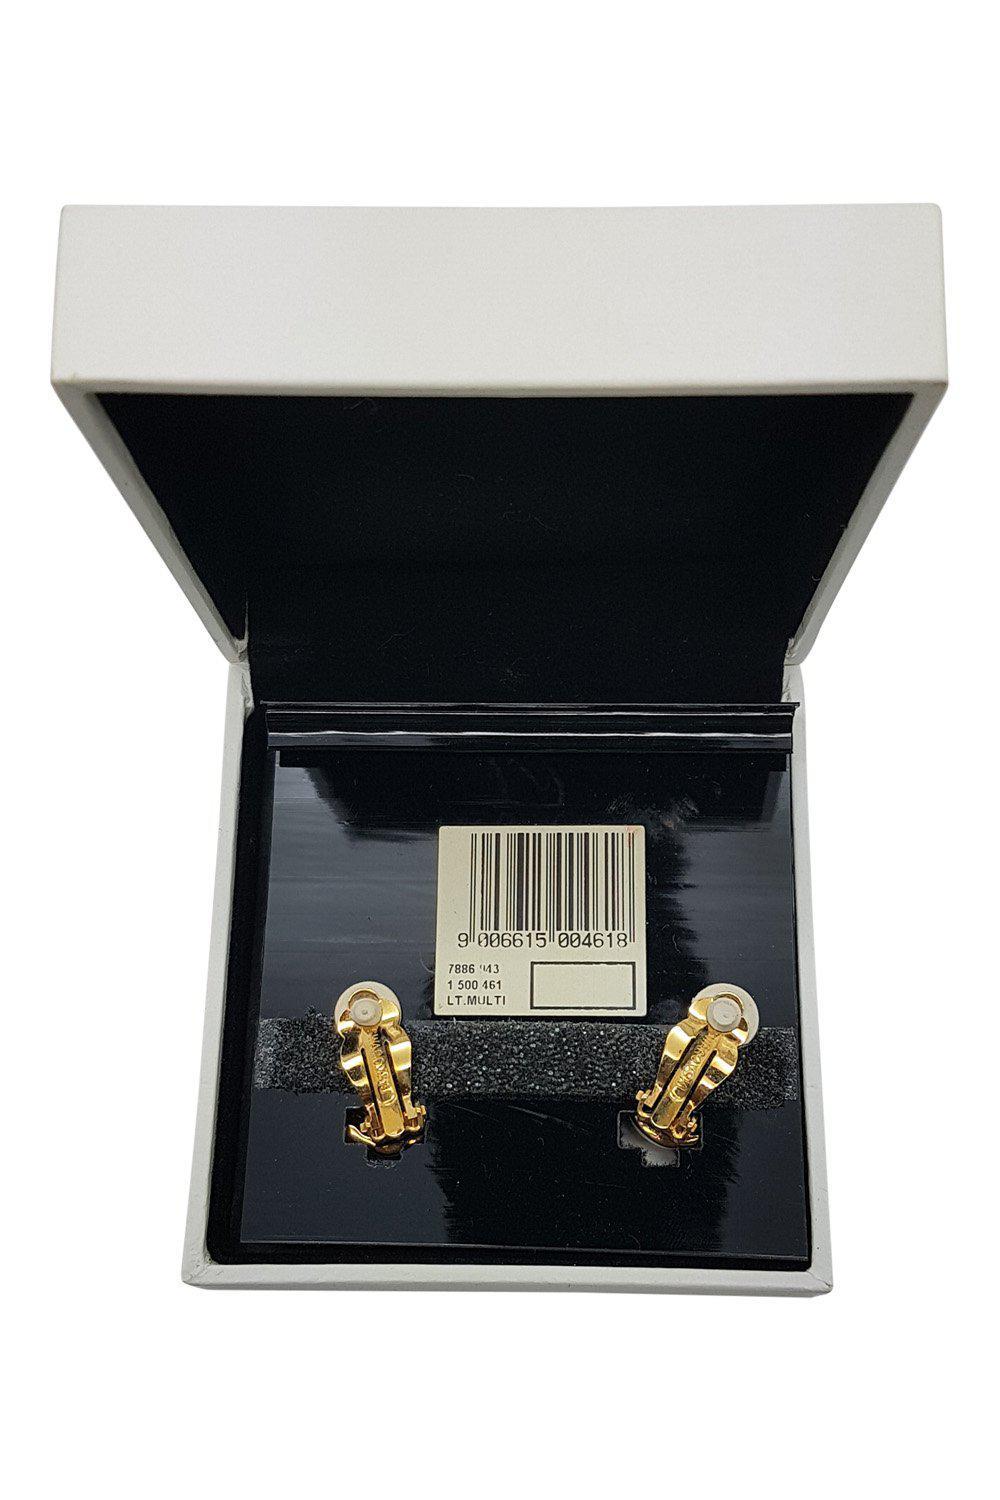 SWAROVSKI Jewelry Gold Plated Crystal Encrusted Clam Earrings-Swarovski-The Freperie